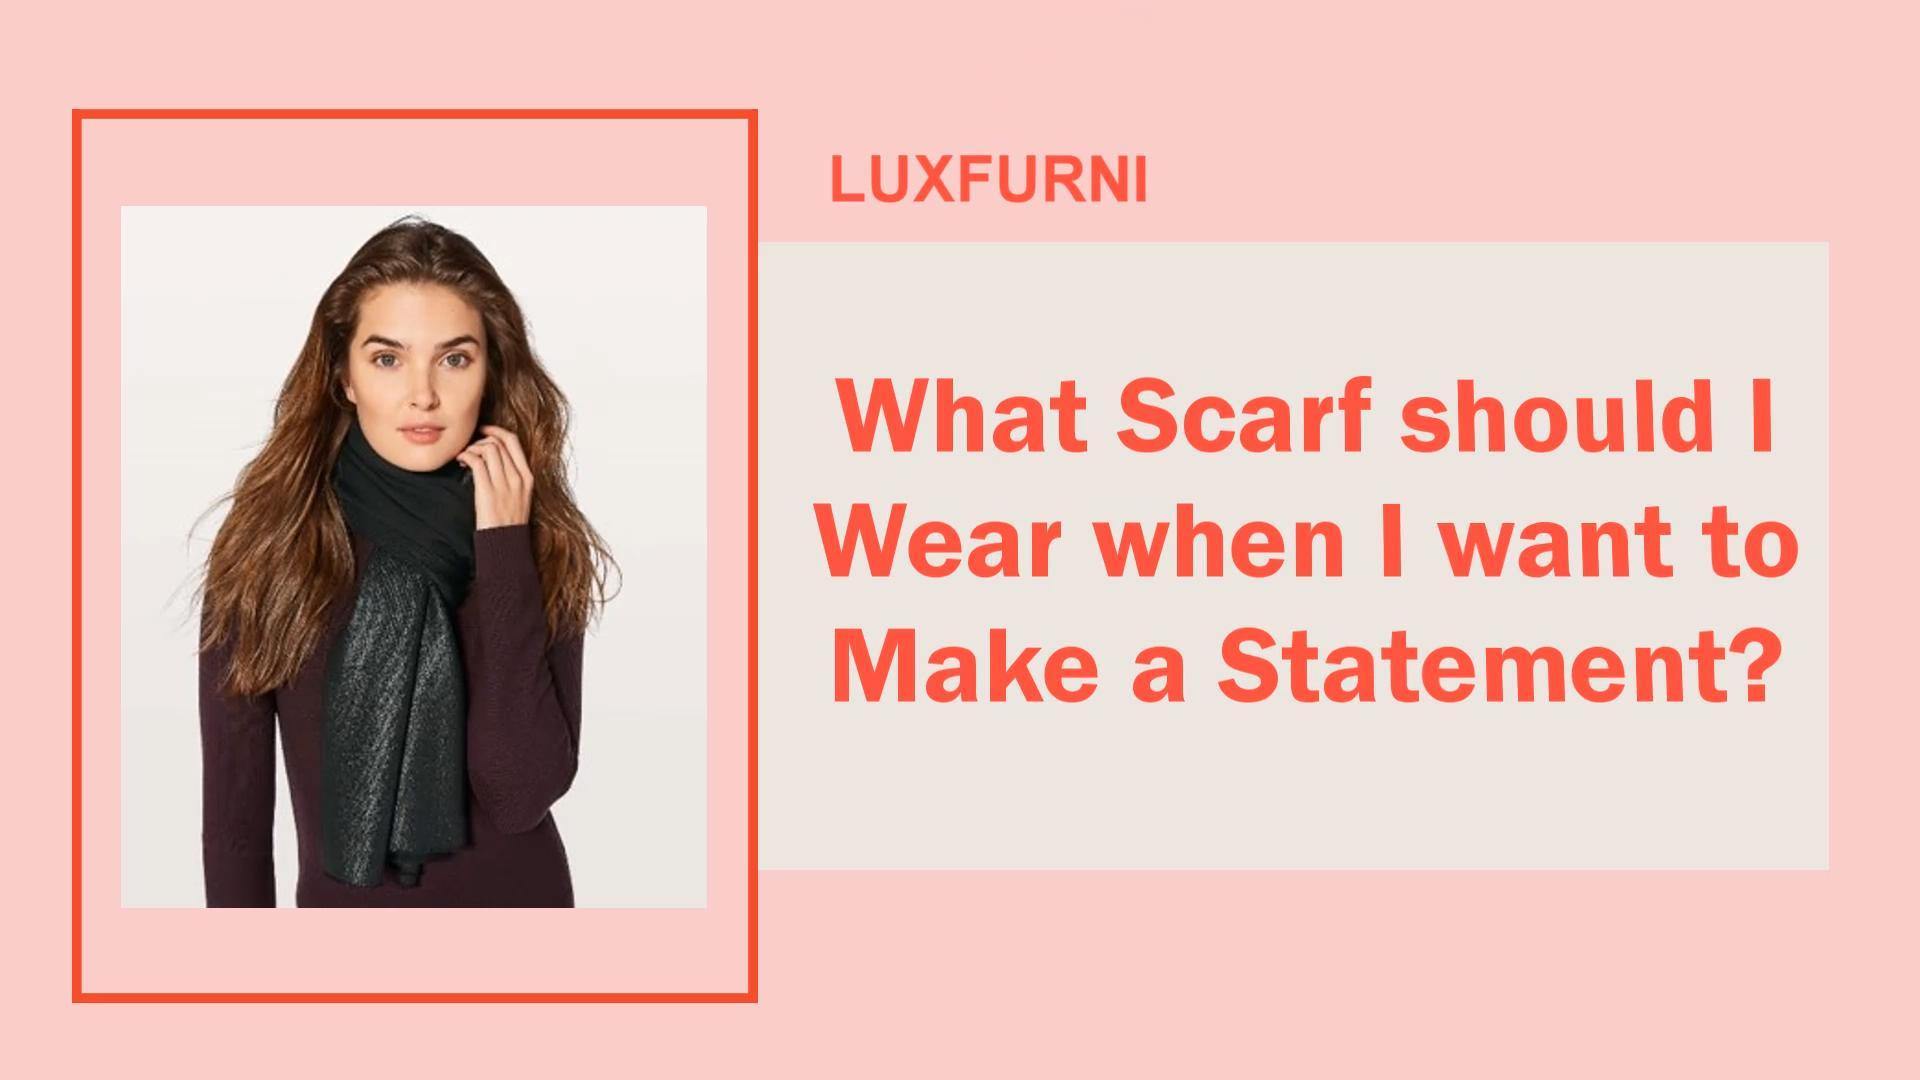 How to Choose the Right Scarf Episode 5 - When I want to Make a Statement - Luxfurni